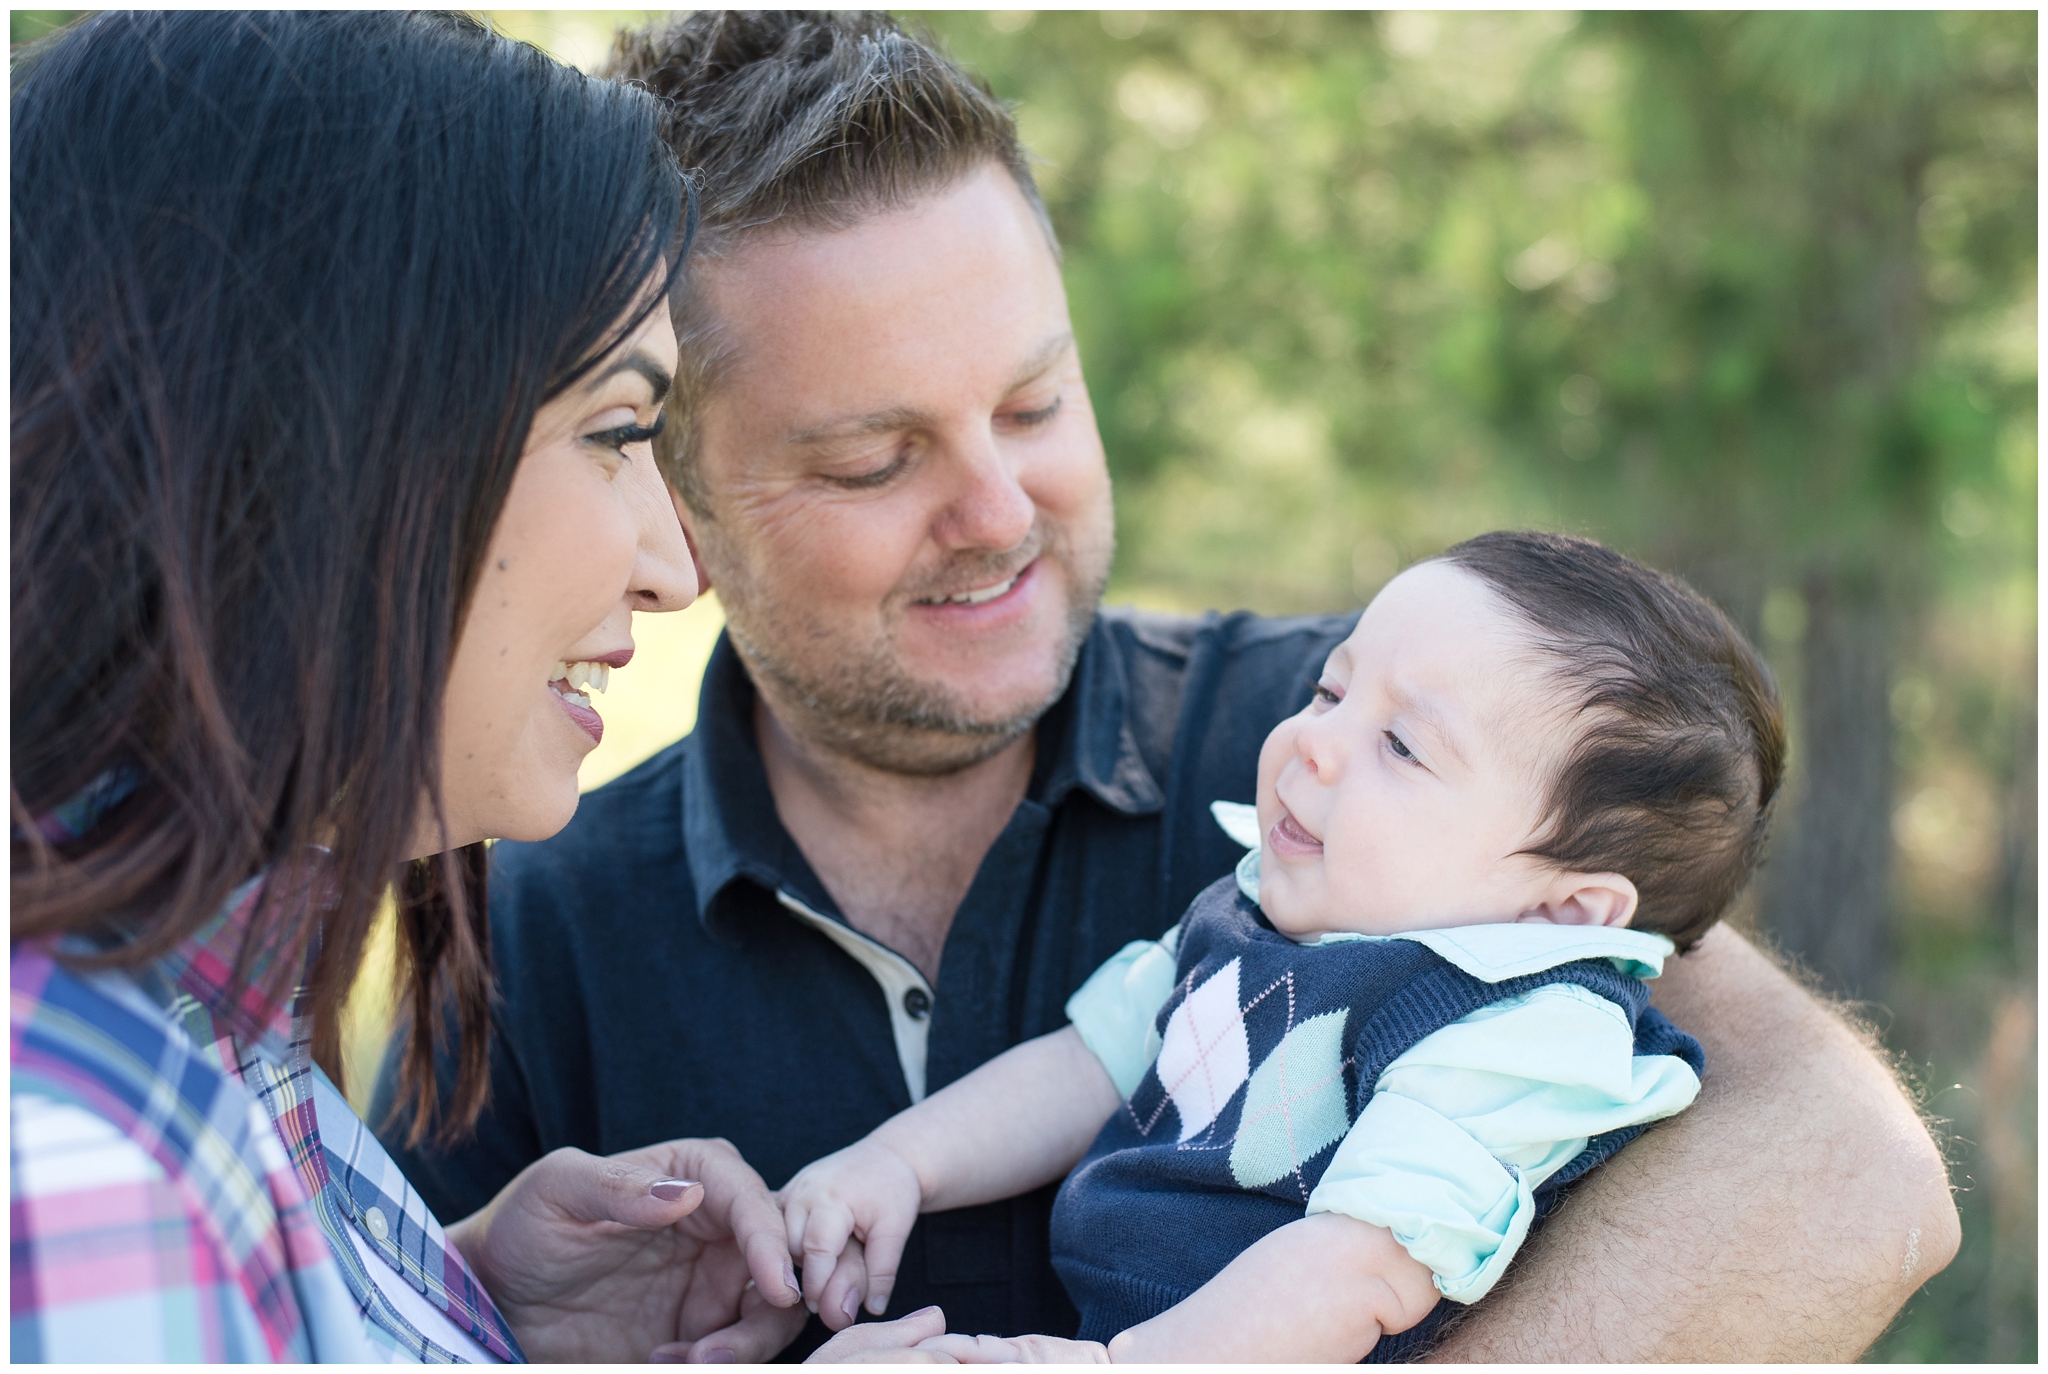 Kingwood child photographer session with 3 month old baby boy & his parents